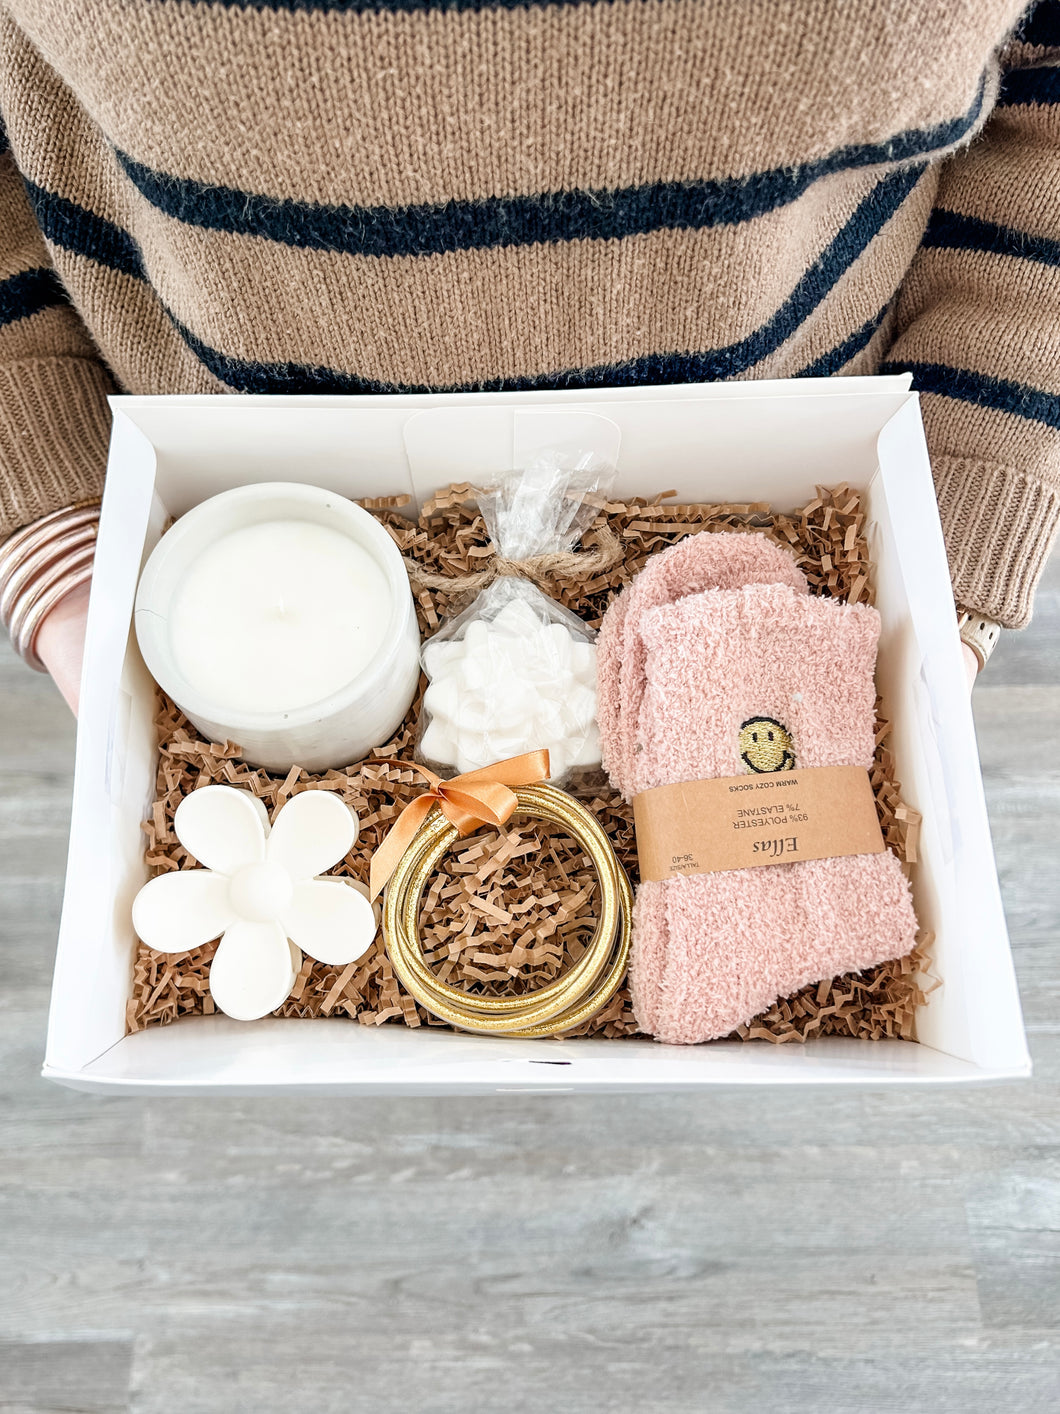 PINK - The Cute and Cozy Box-Gift Box by Louisiana Gift & Bath Co.